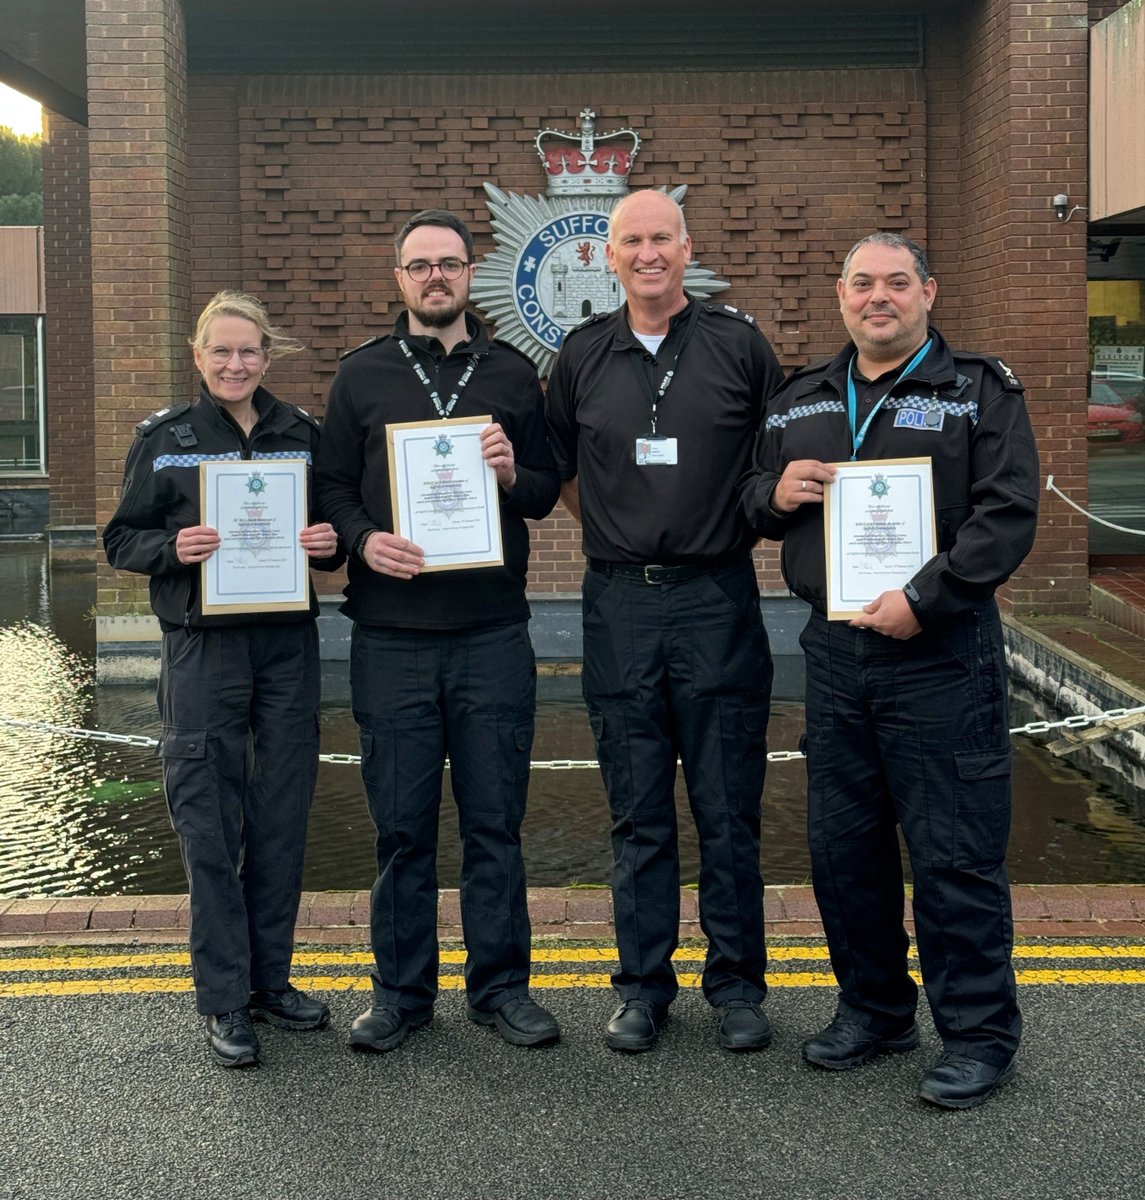 Earlier this month these #specialconstables passed the 3 week standard response driving course - it is a challenging course and we are very proud! They took time out of their day jobs, showing the commitment they have to this #volunteer role supporting @SuffolkPolice #couldyou?